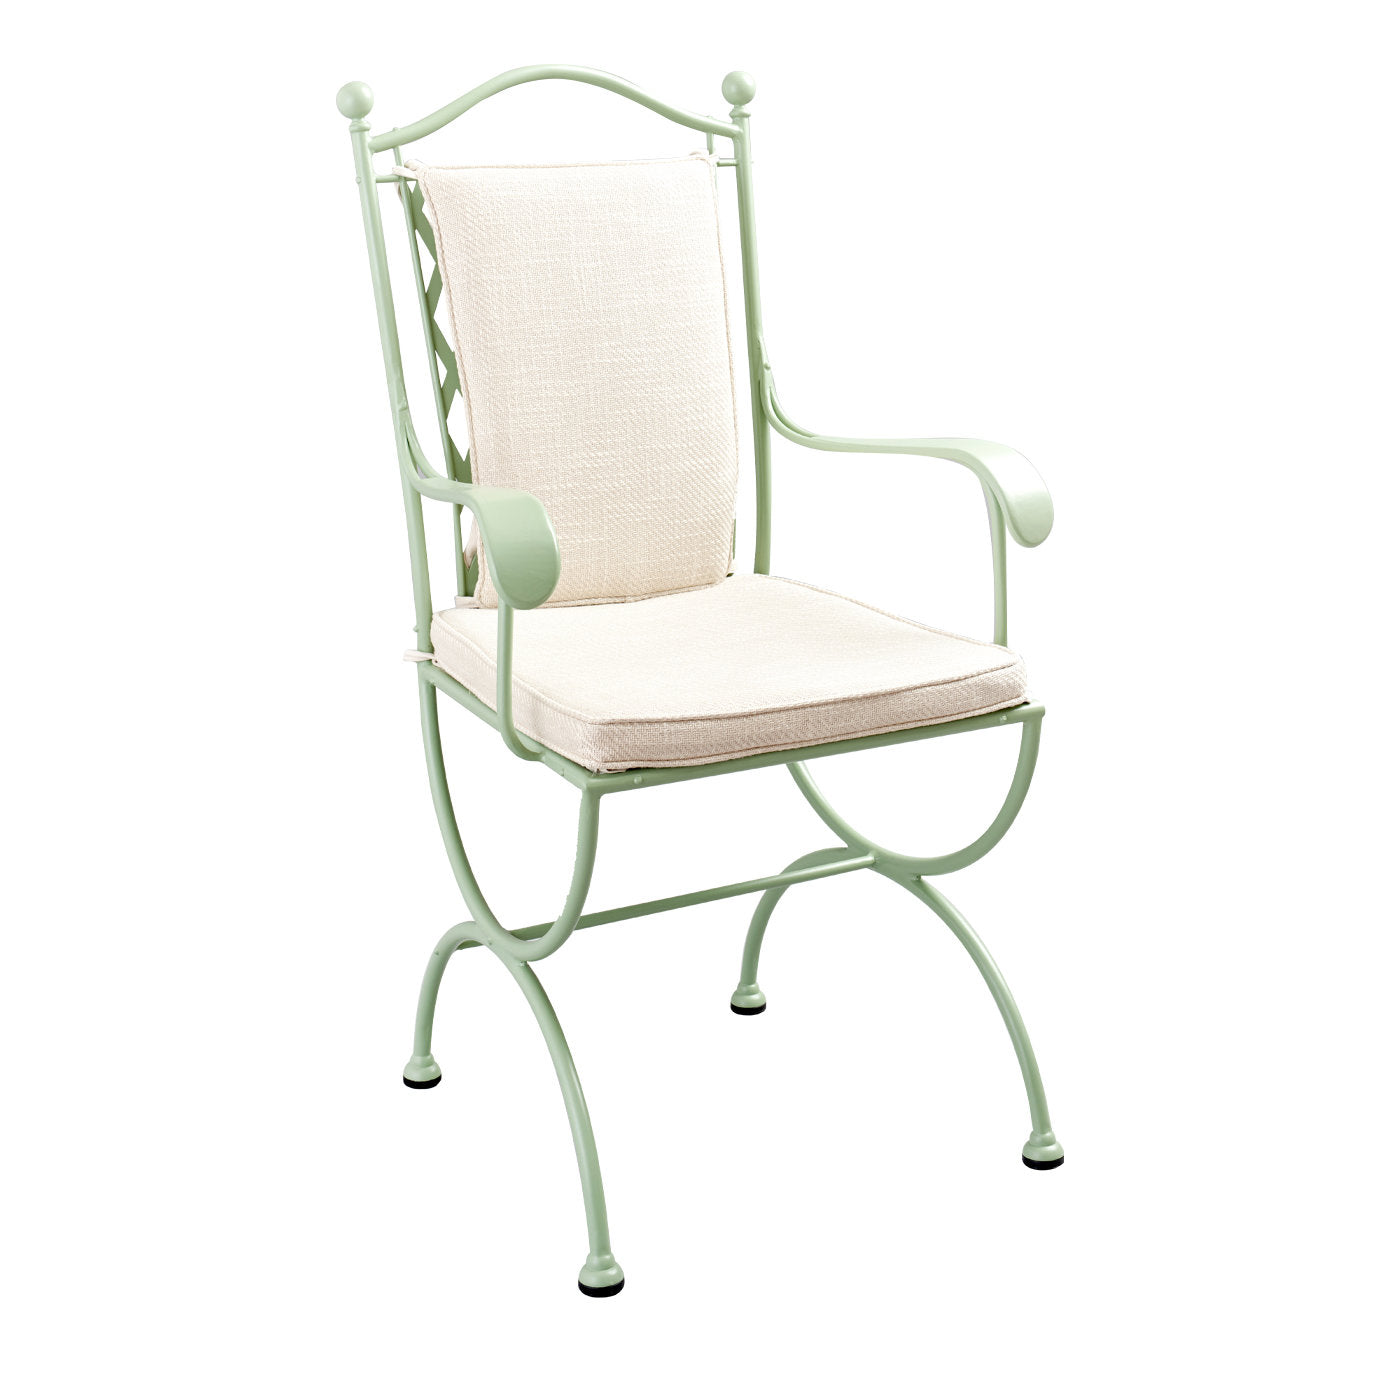 Rombi Outdoor Green Stainless Steel Chair with Armrests - Main view